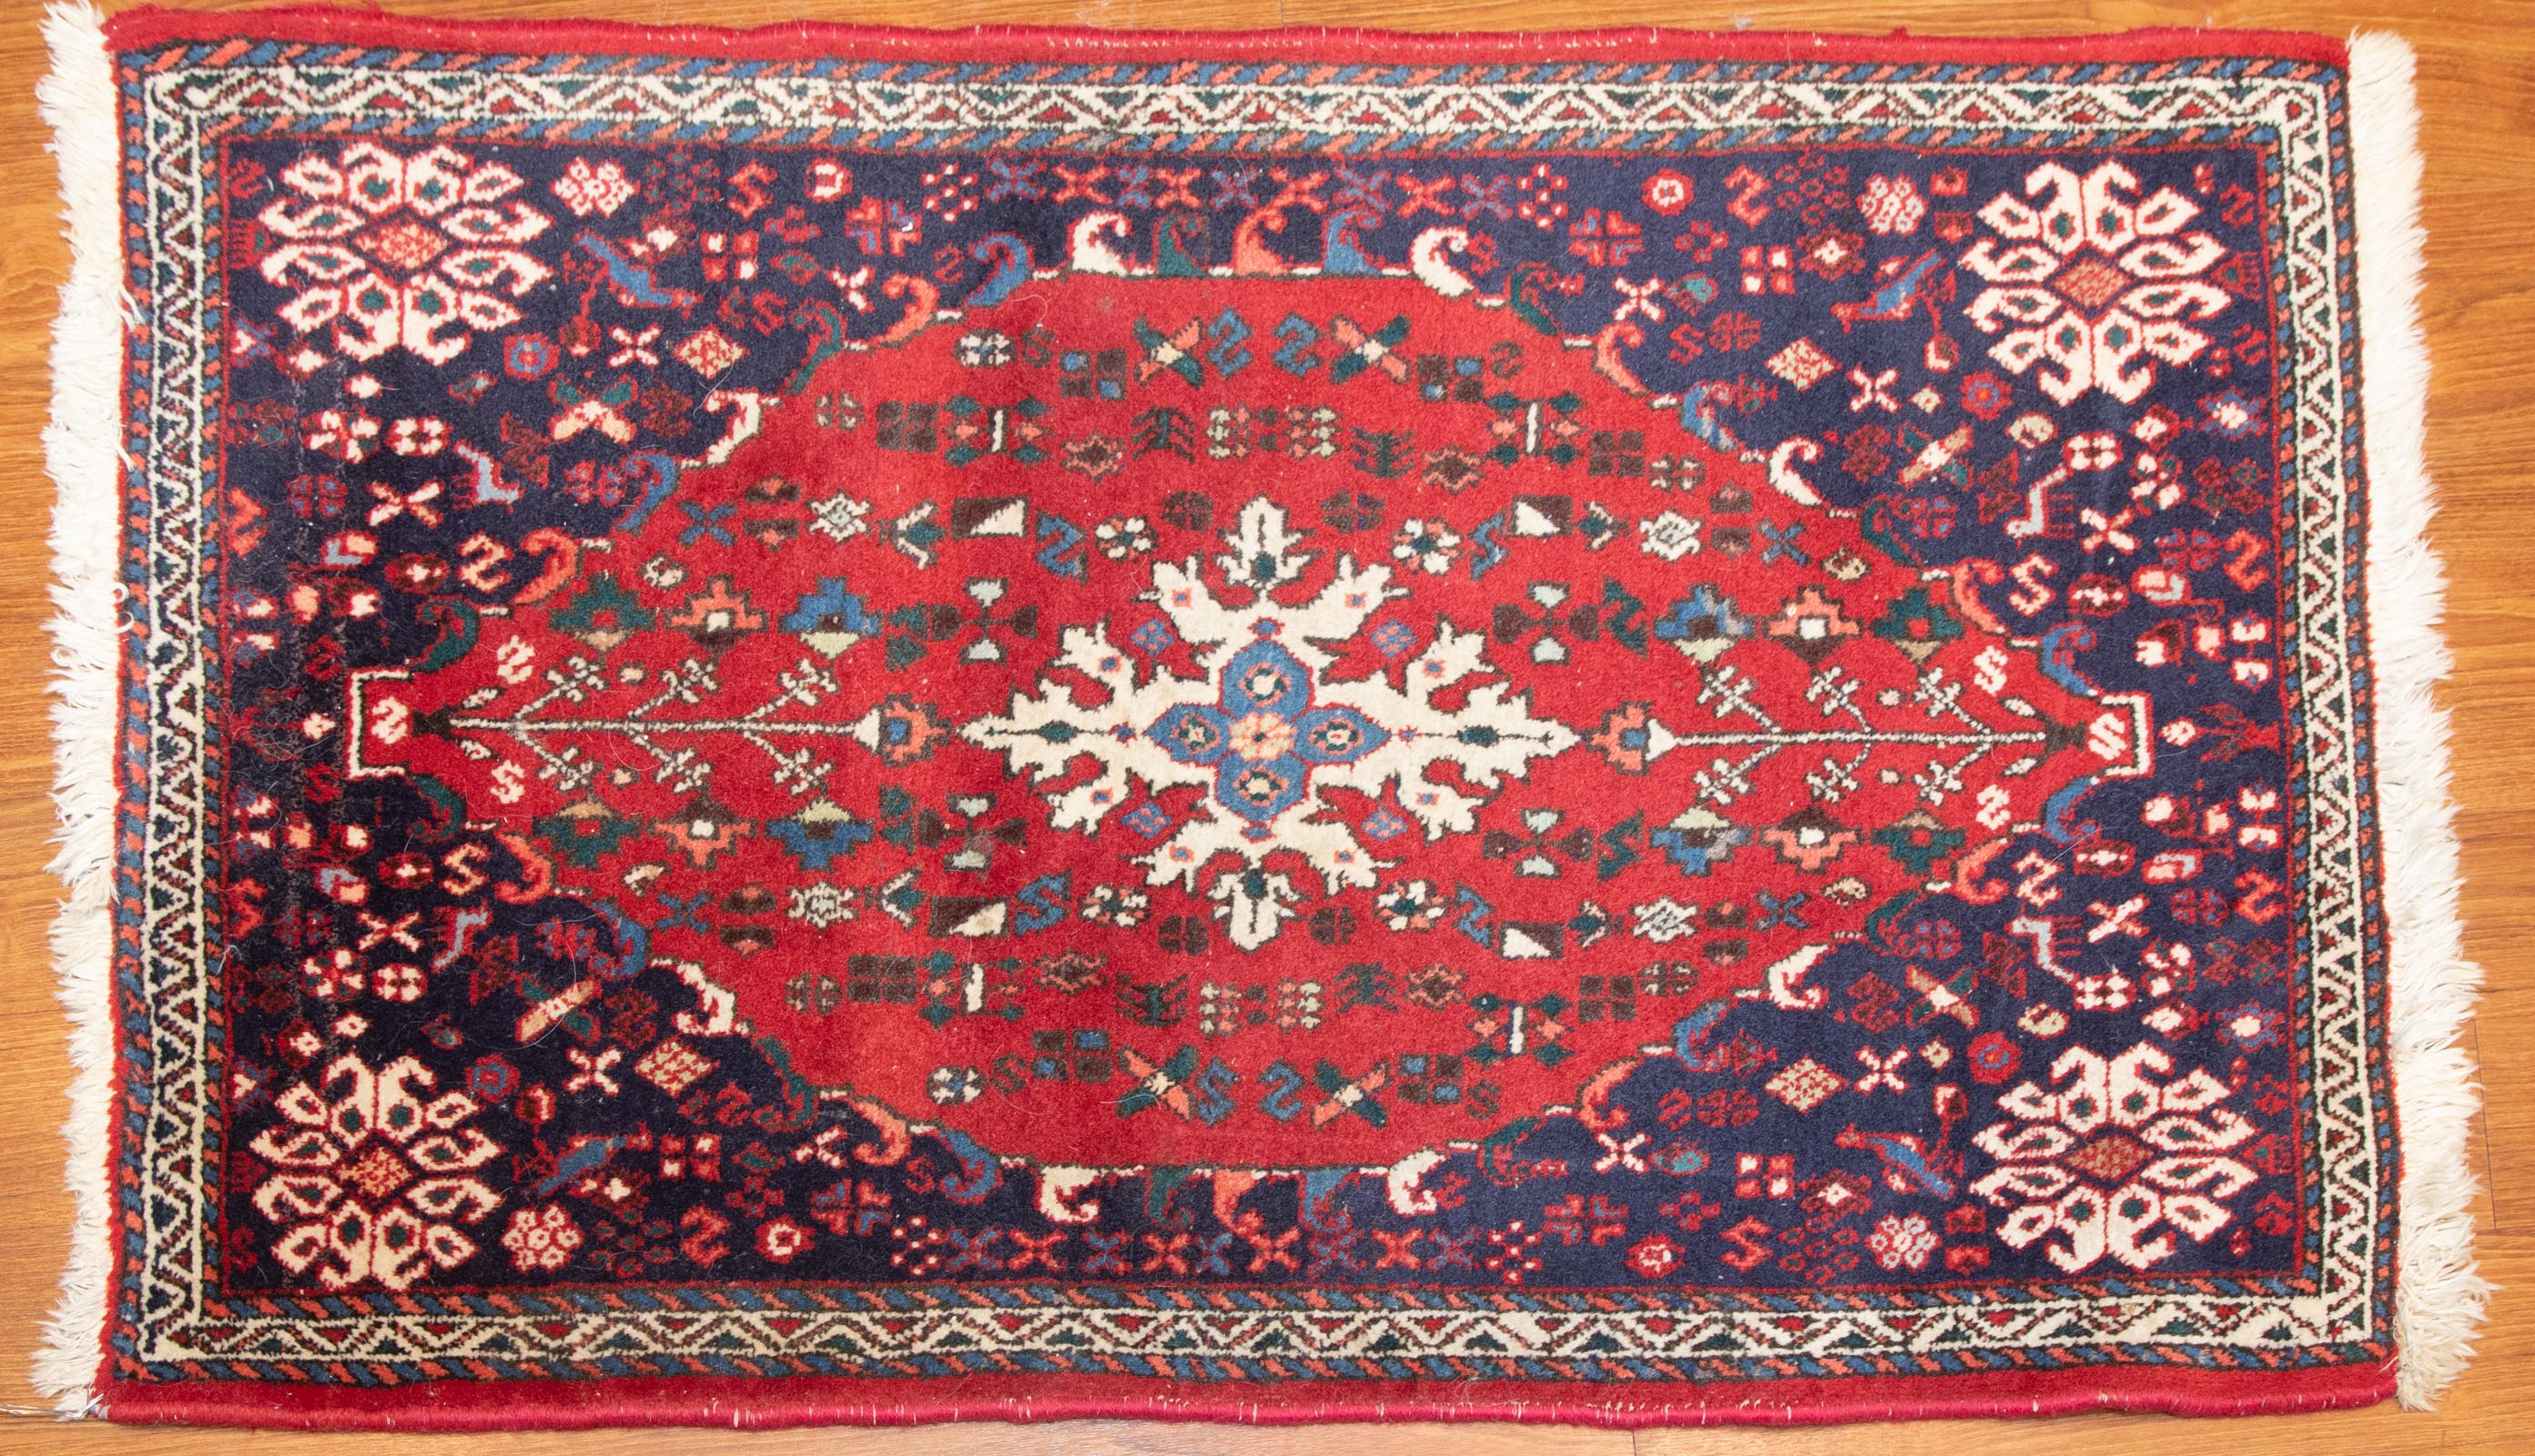 ABADEH RUG PERSIA 2 2 X 3 4 Fourth 28858a